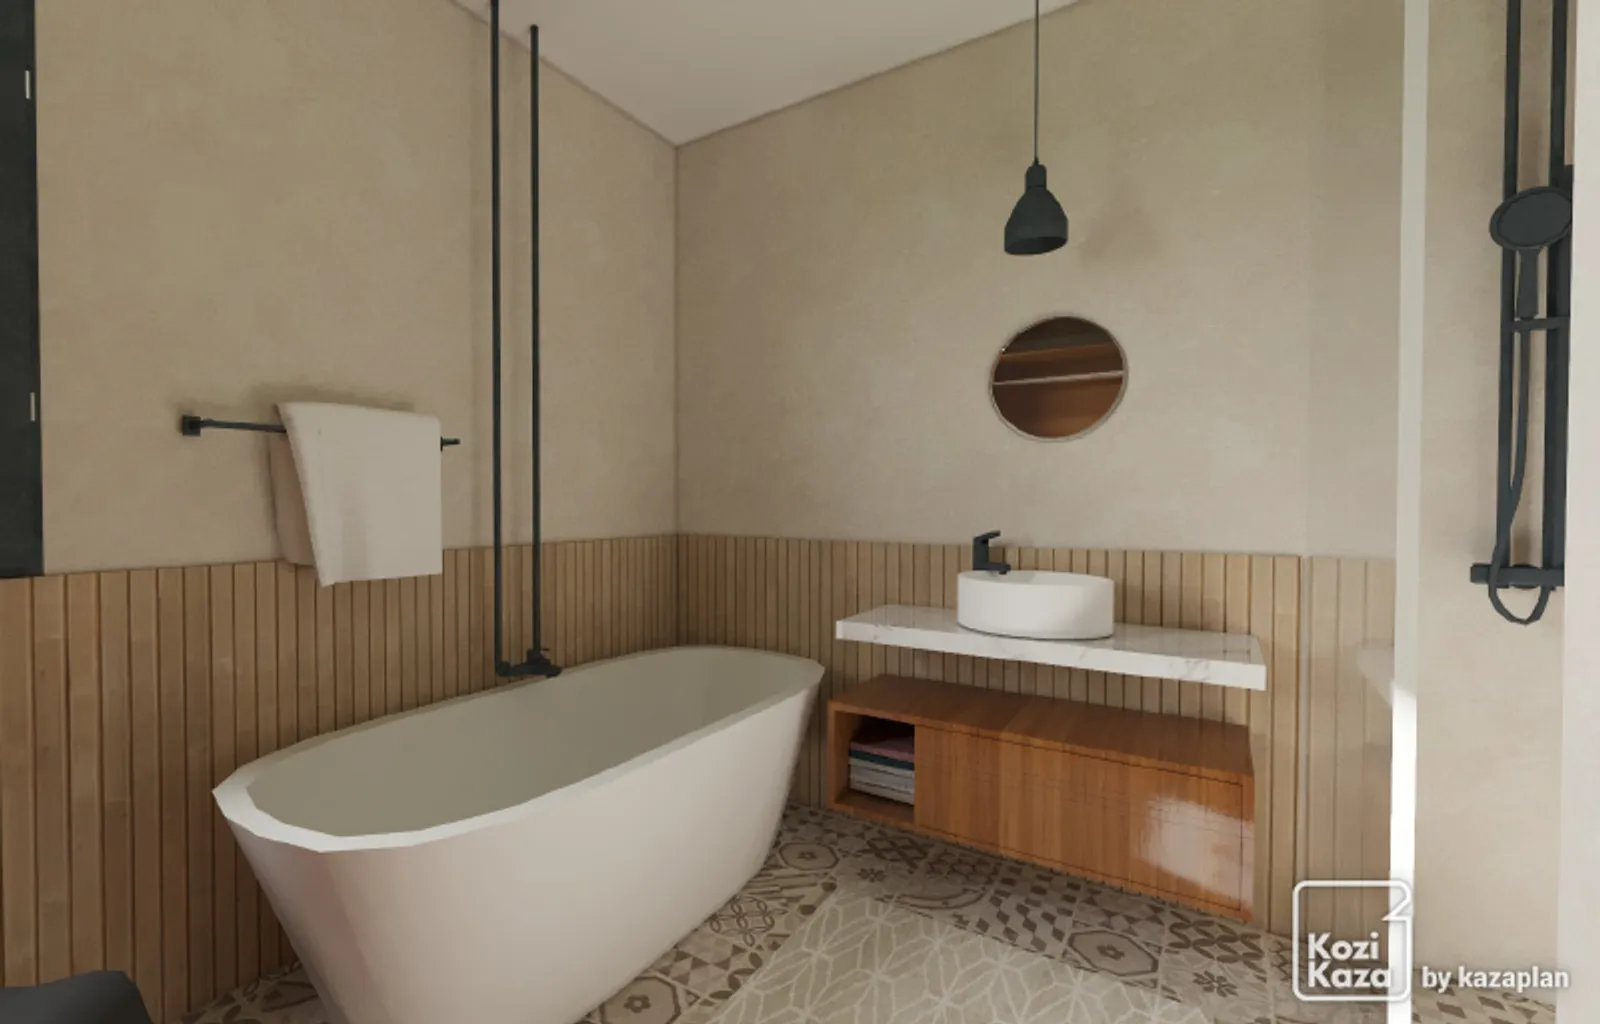 Free Online Bathroom Design Tool - 21 Bathroom Design Tool Options Free Paid Home Stratosphere - Unfortunately, you can only choose from three bathroom designs.